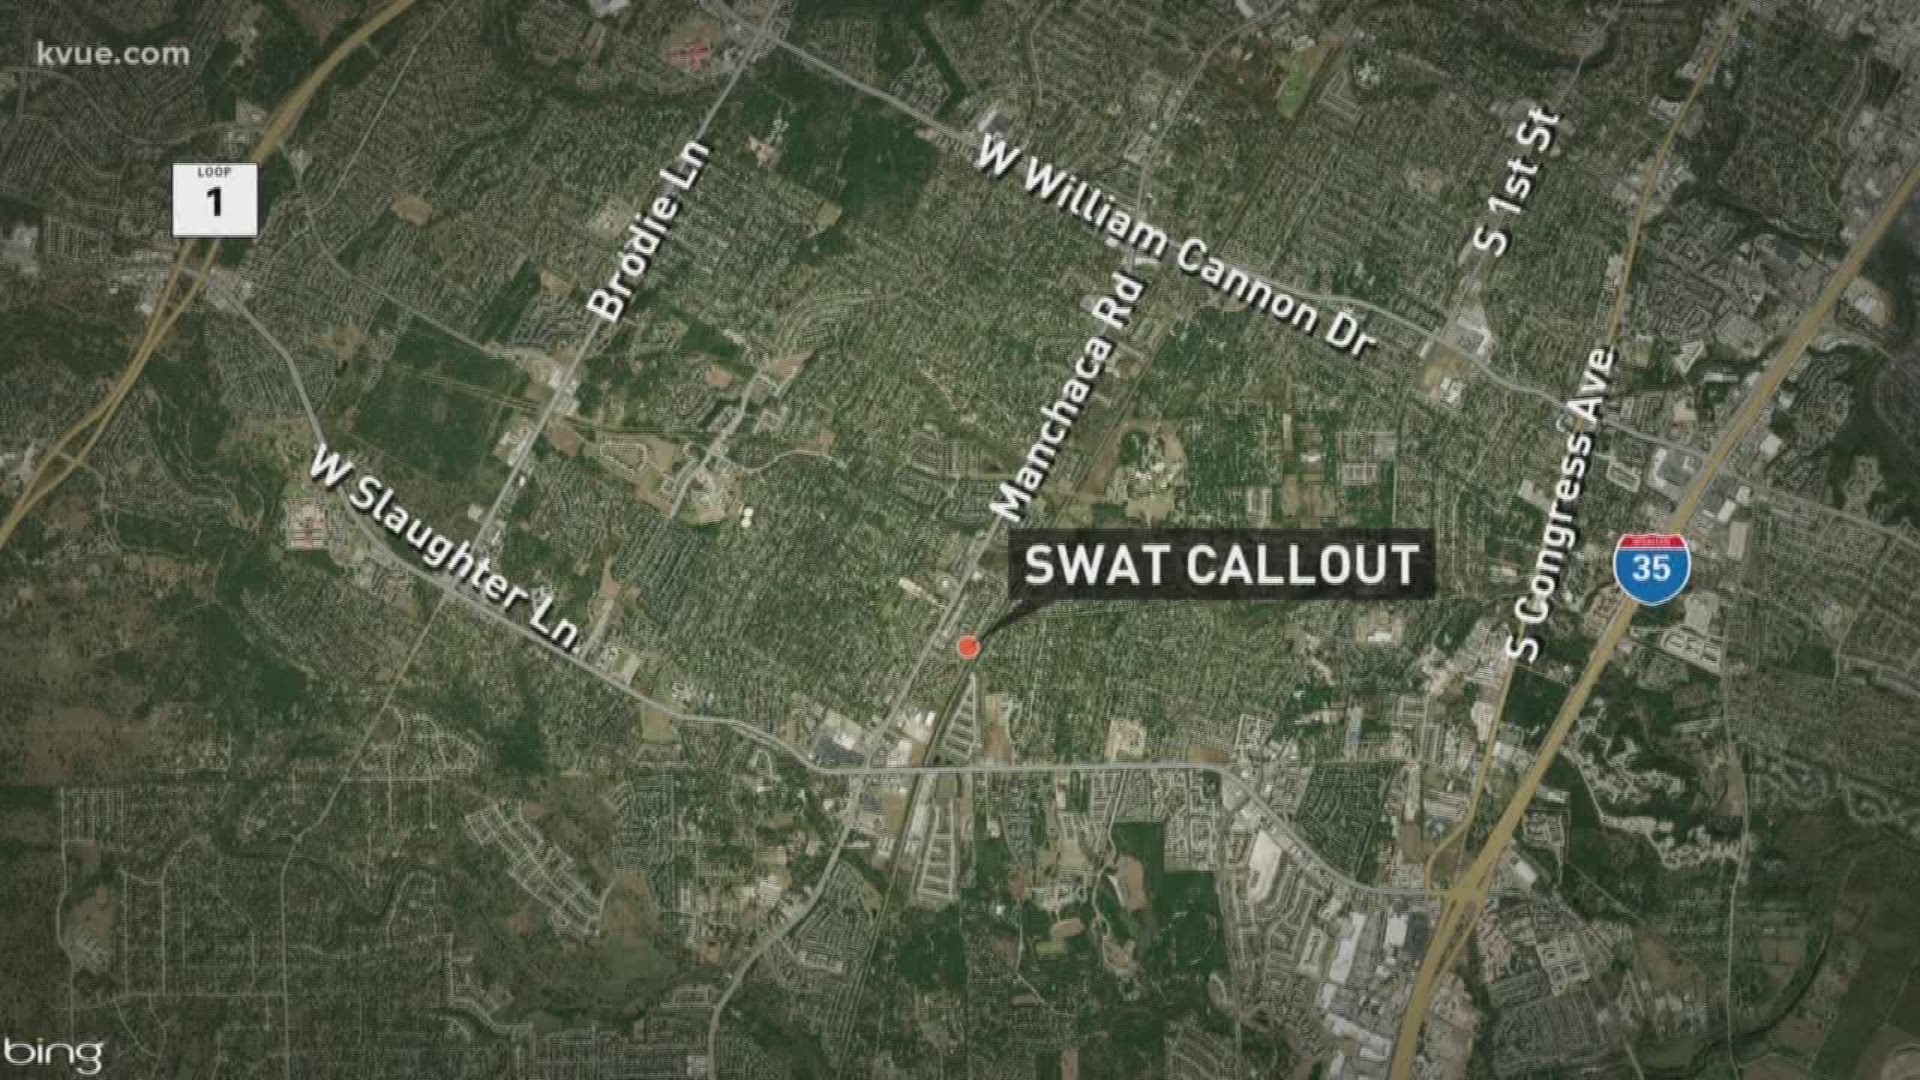 Members of the Austin SWAT team are out in southwest Austin responding to a barricaded subject, according to Austin police.